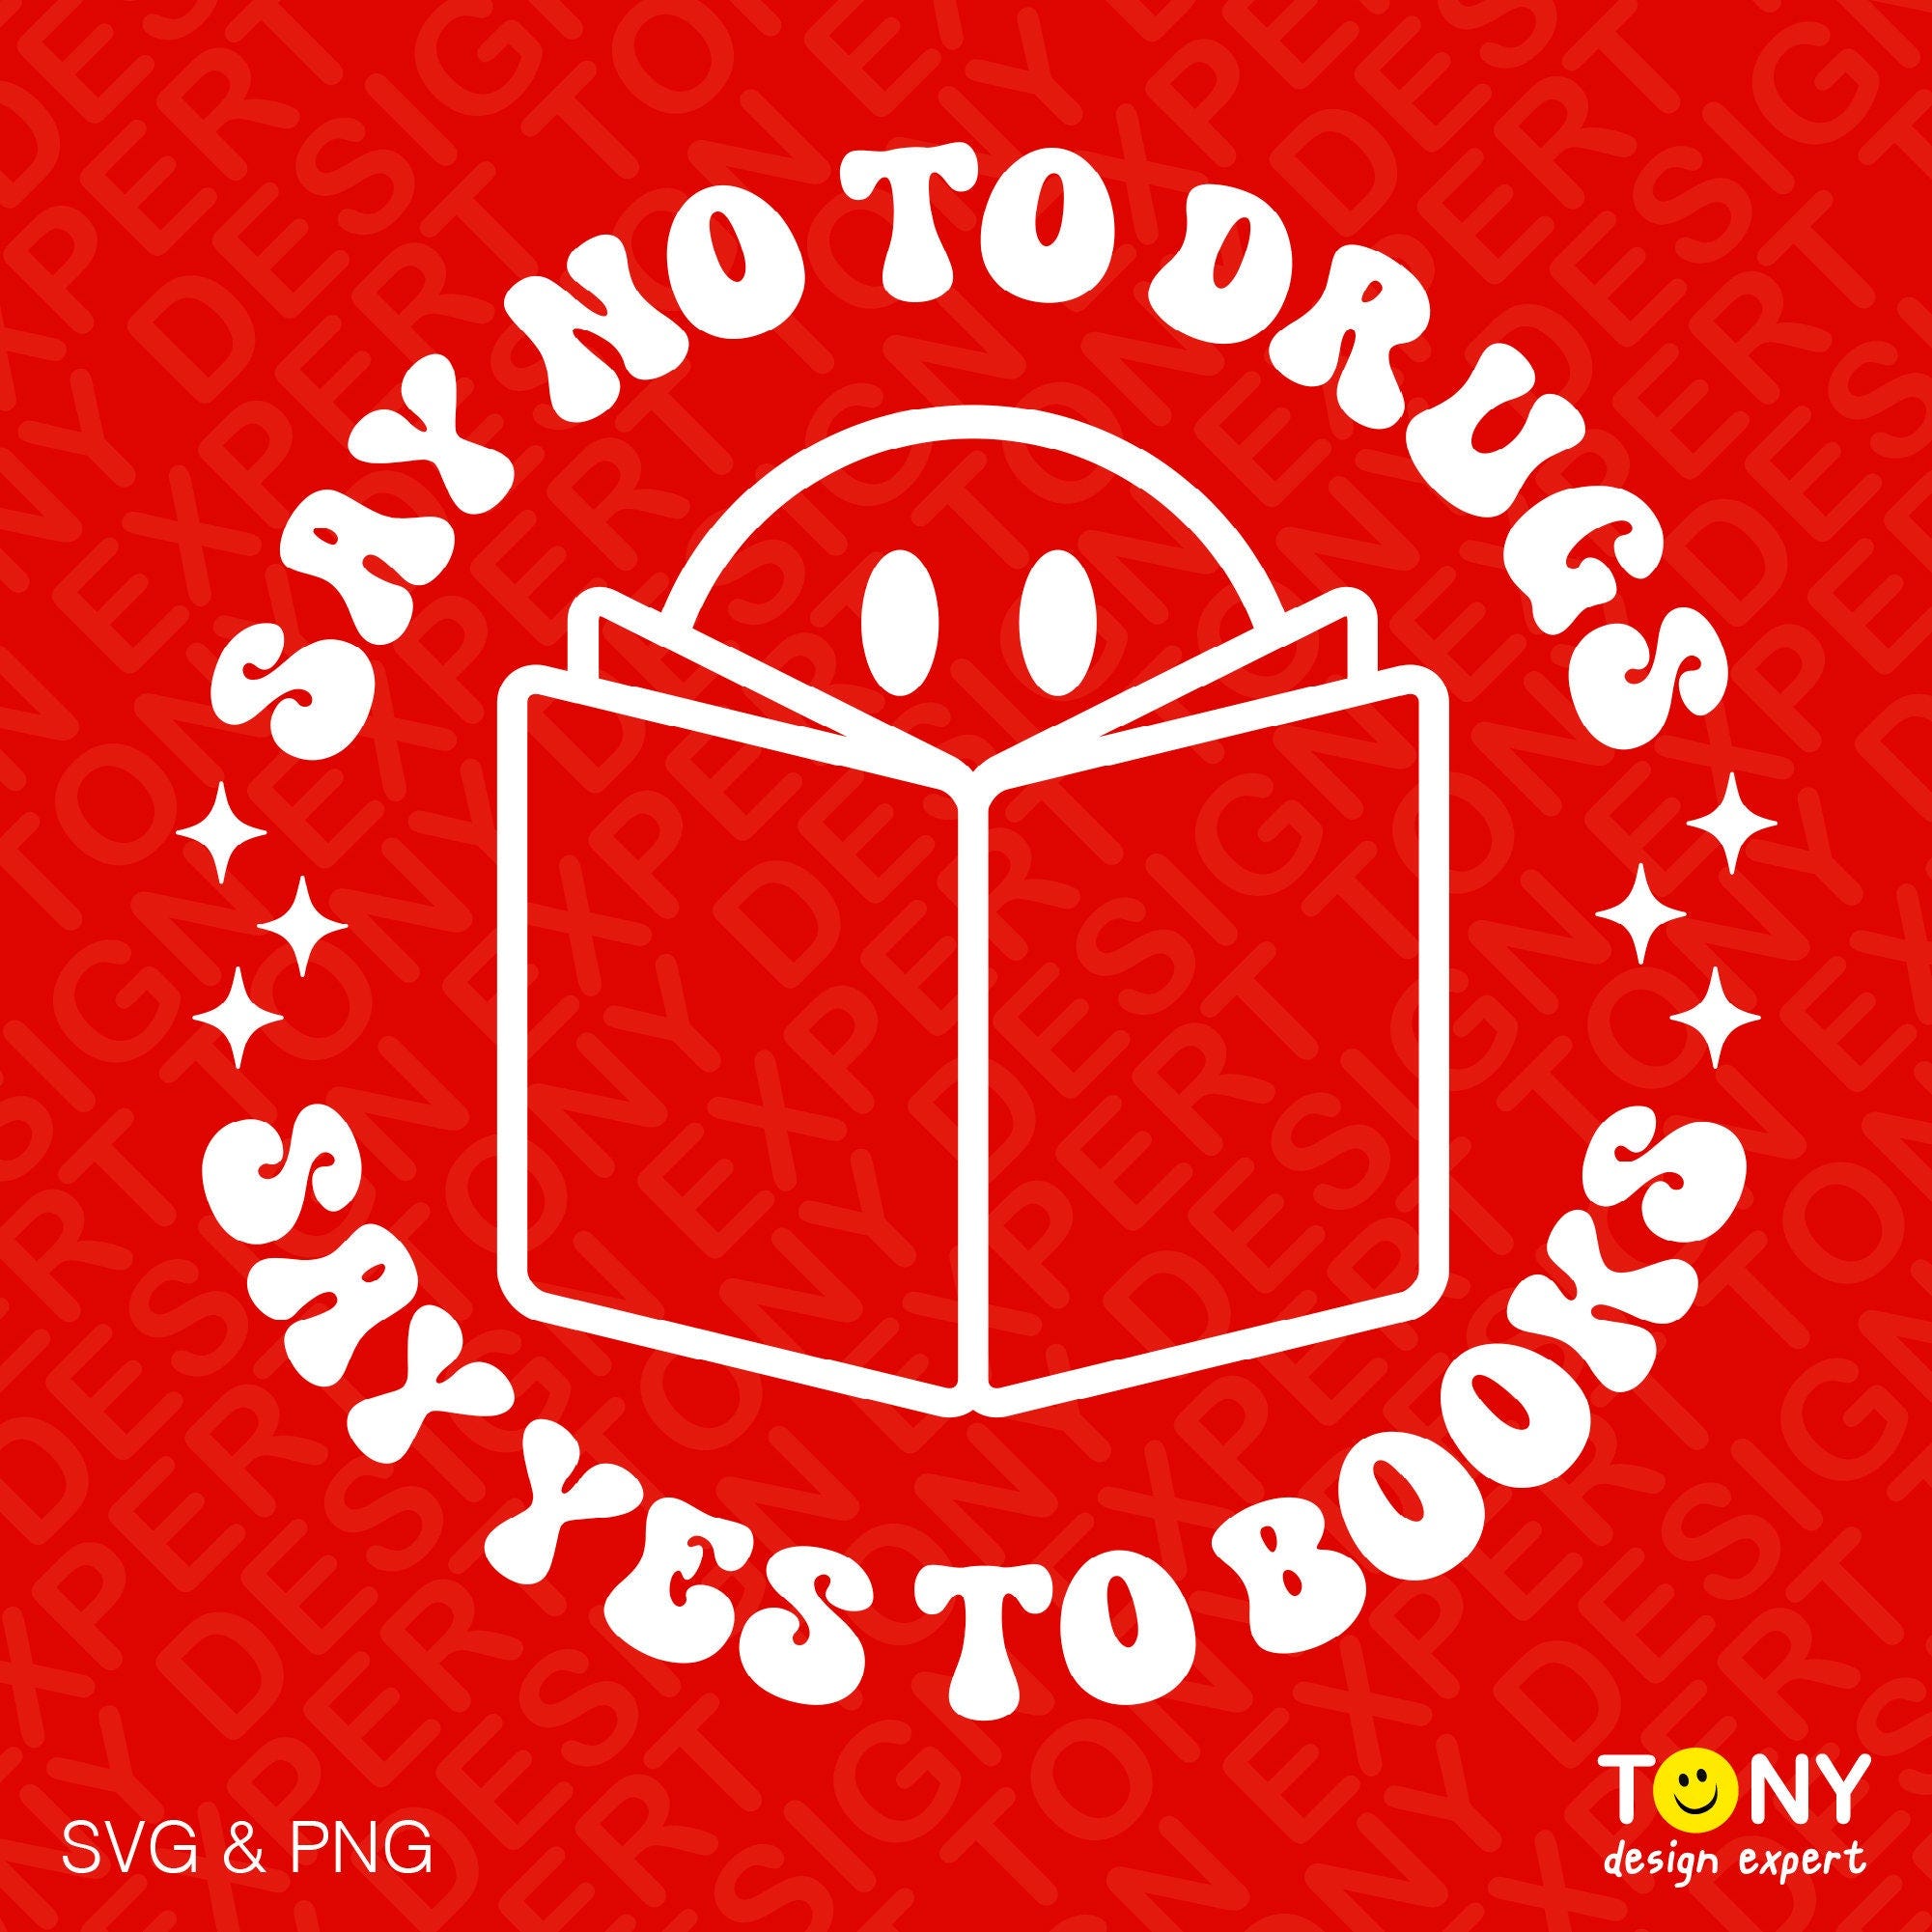 3 Colour Bundle, Say No to Drugs Svg Png, Say Yes to Books Svg, Trendy Funny Groovy Retro Digital Download Sublimation PNG & SVG Cricut